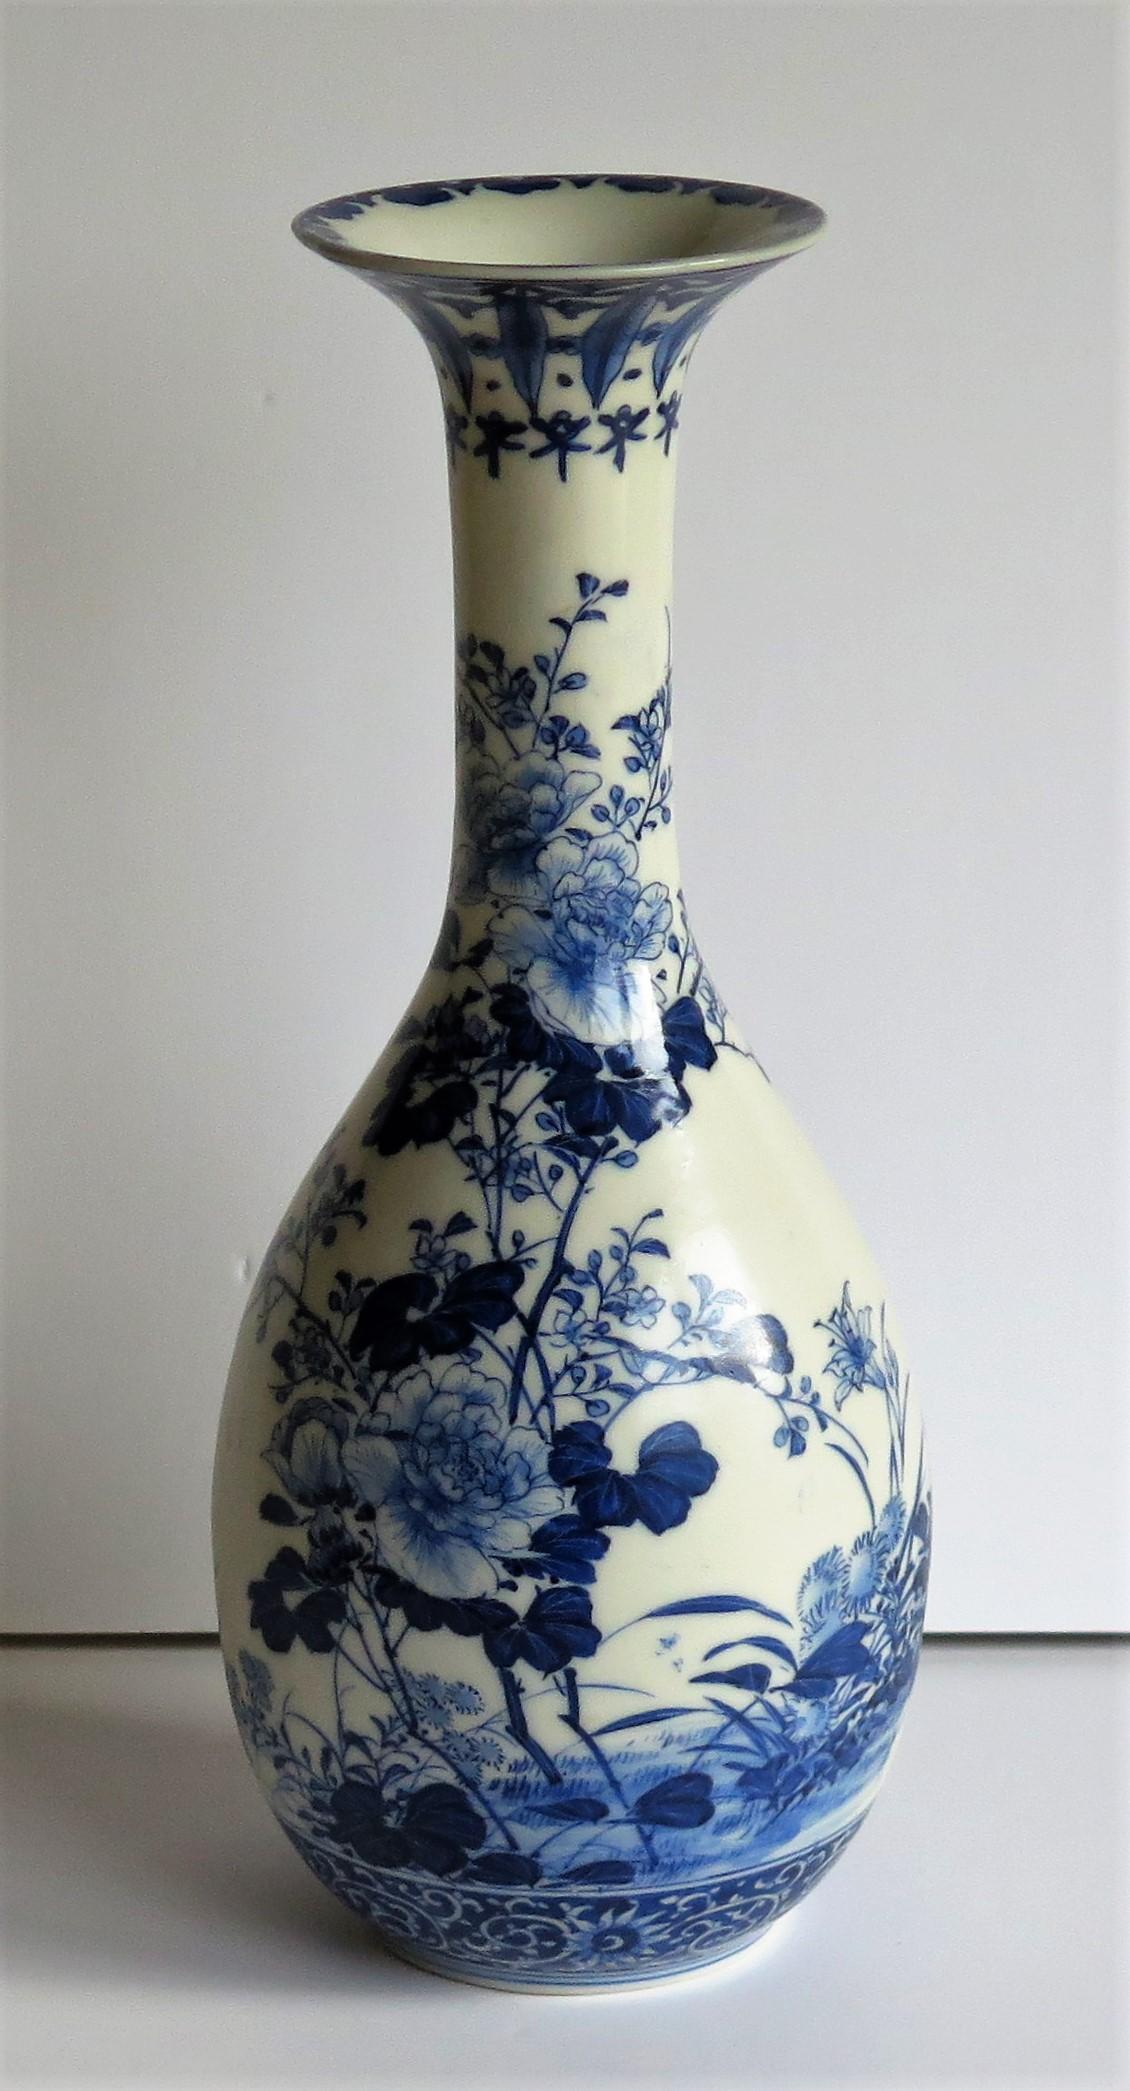 This is a fine quality Chinese porcelain blue and white bottle vase which we date to the mid-19th century, Qing Dynasty, circa 1850 or possibly earlier.

The vase is well potted and has a bottle pear-shaped body supported on a low foot and with a